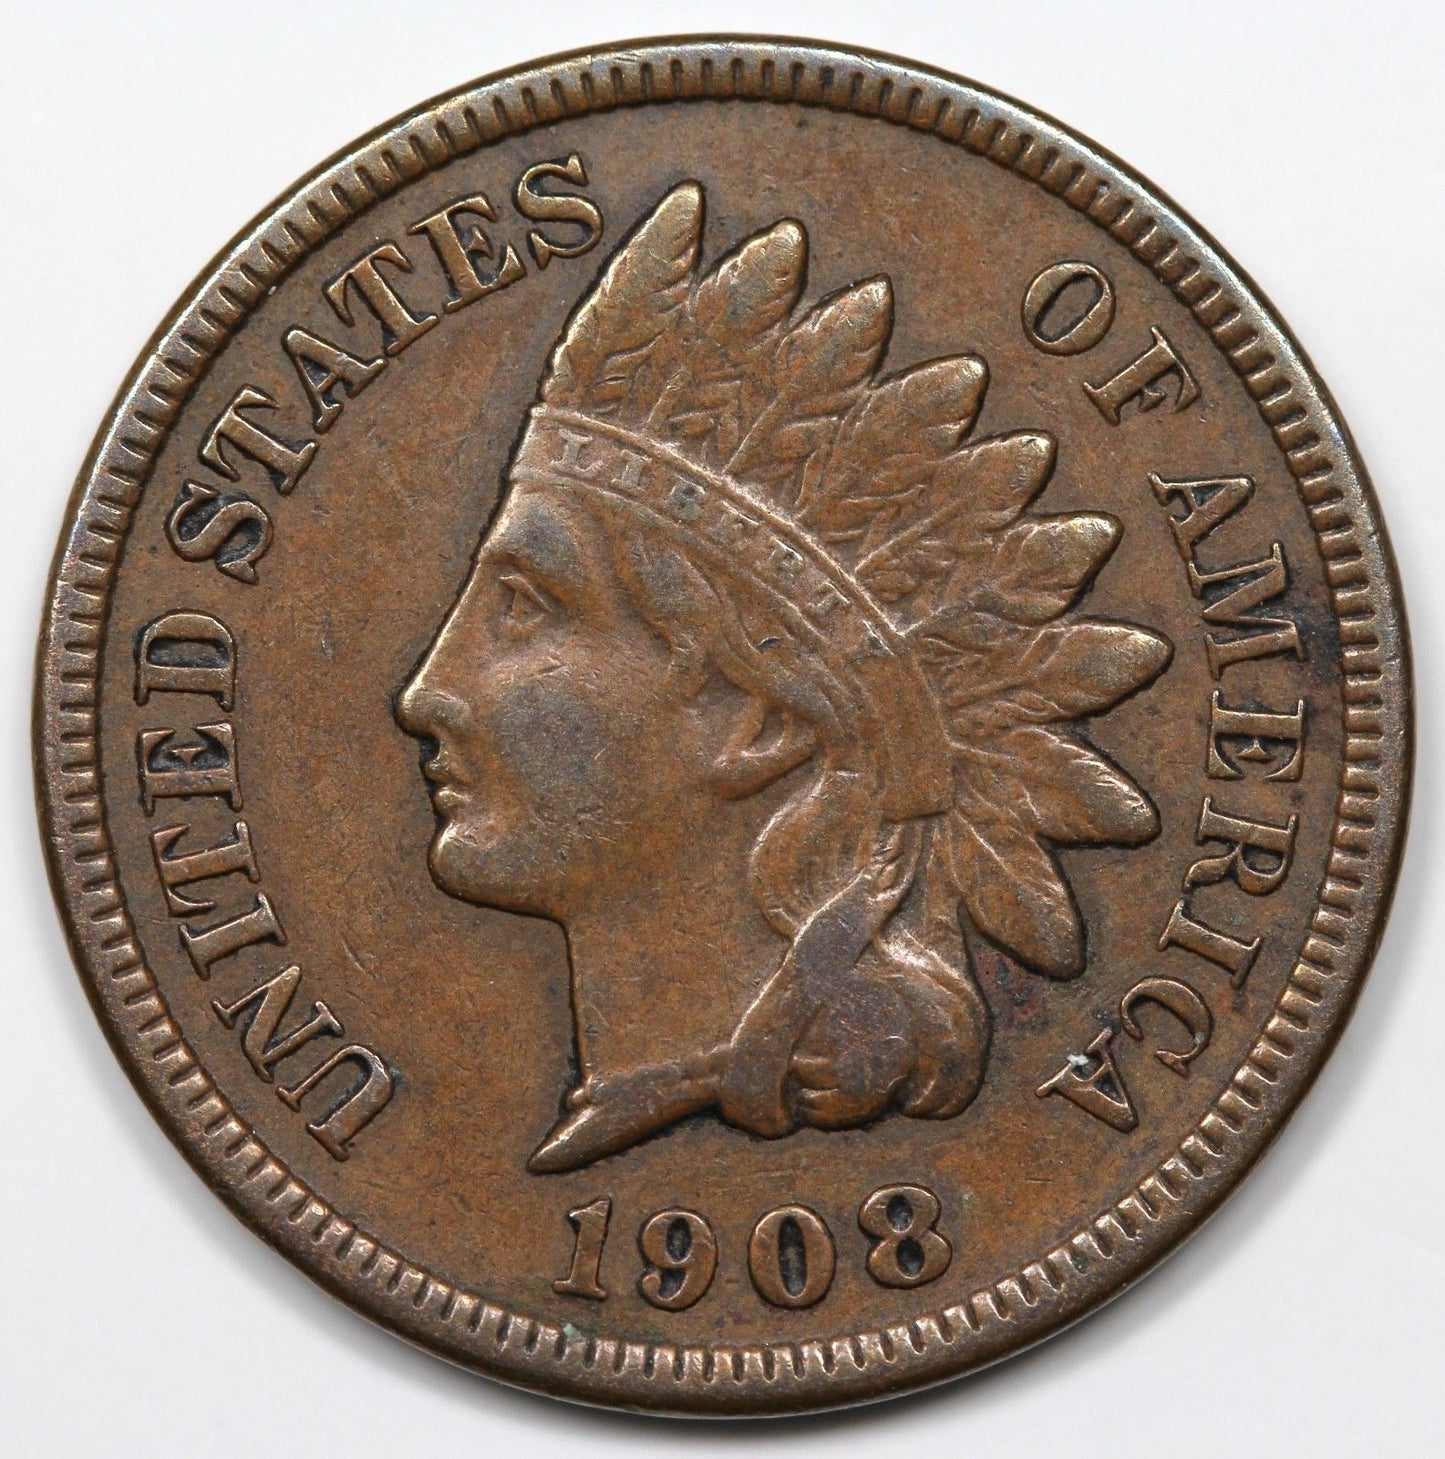 1908 S Indian Cent VF30 | Of Coins & Crystals